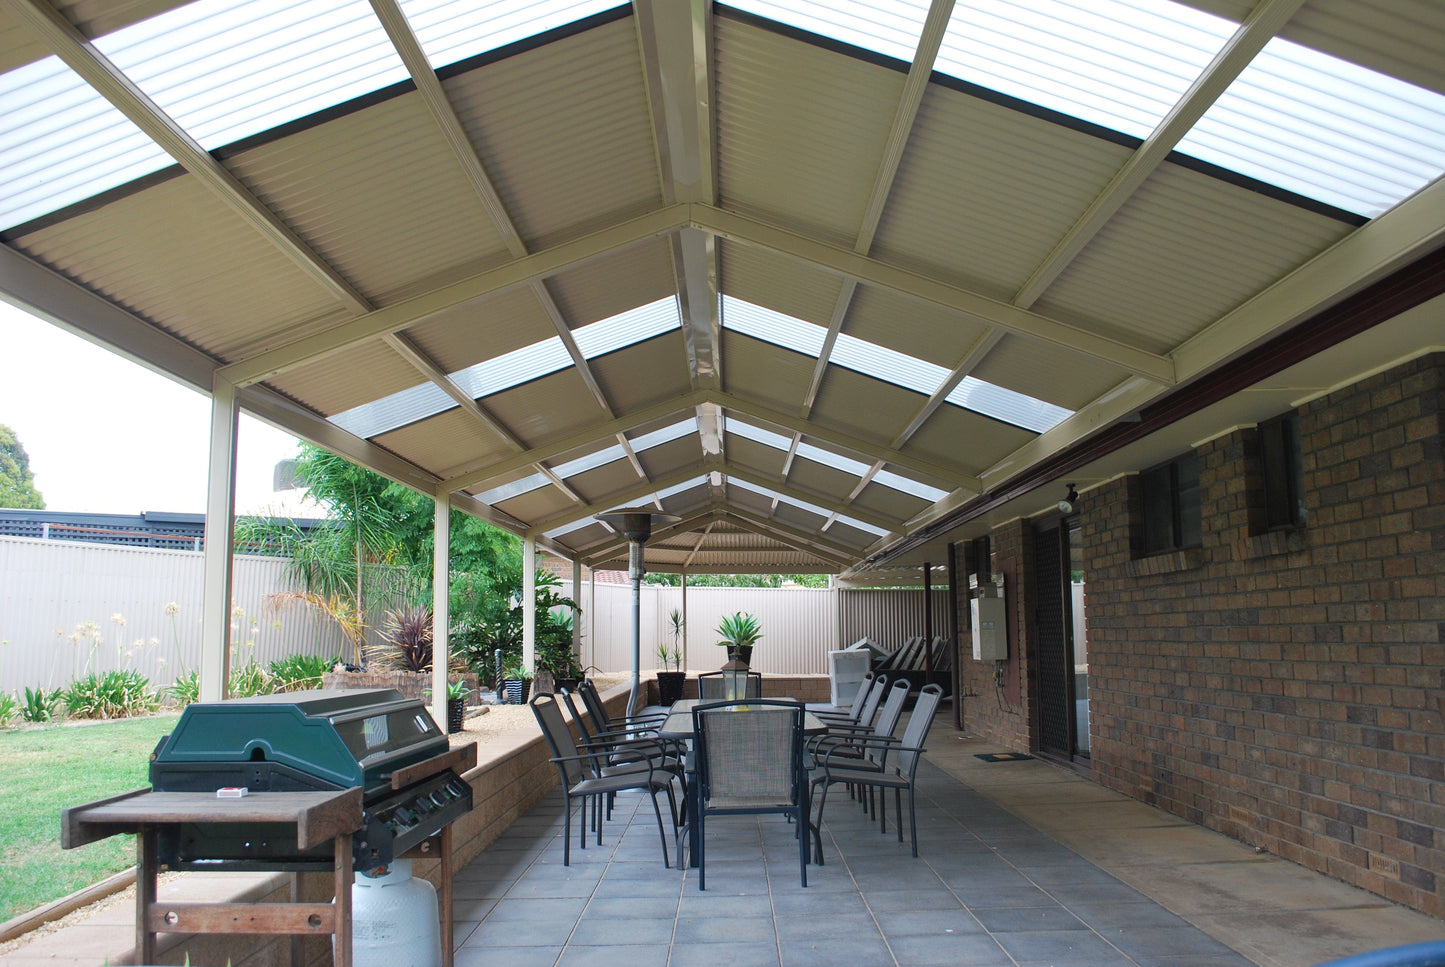 Insulated Gable Patio - 6m x 4m- Supply & Install QHI National